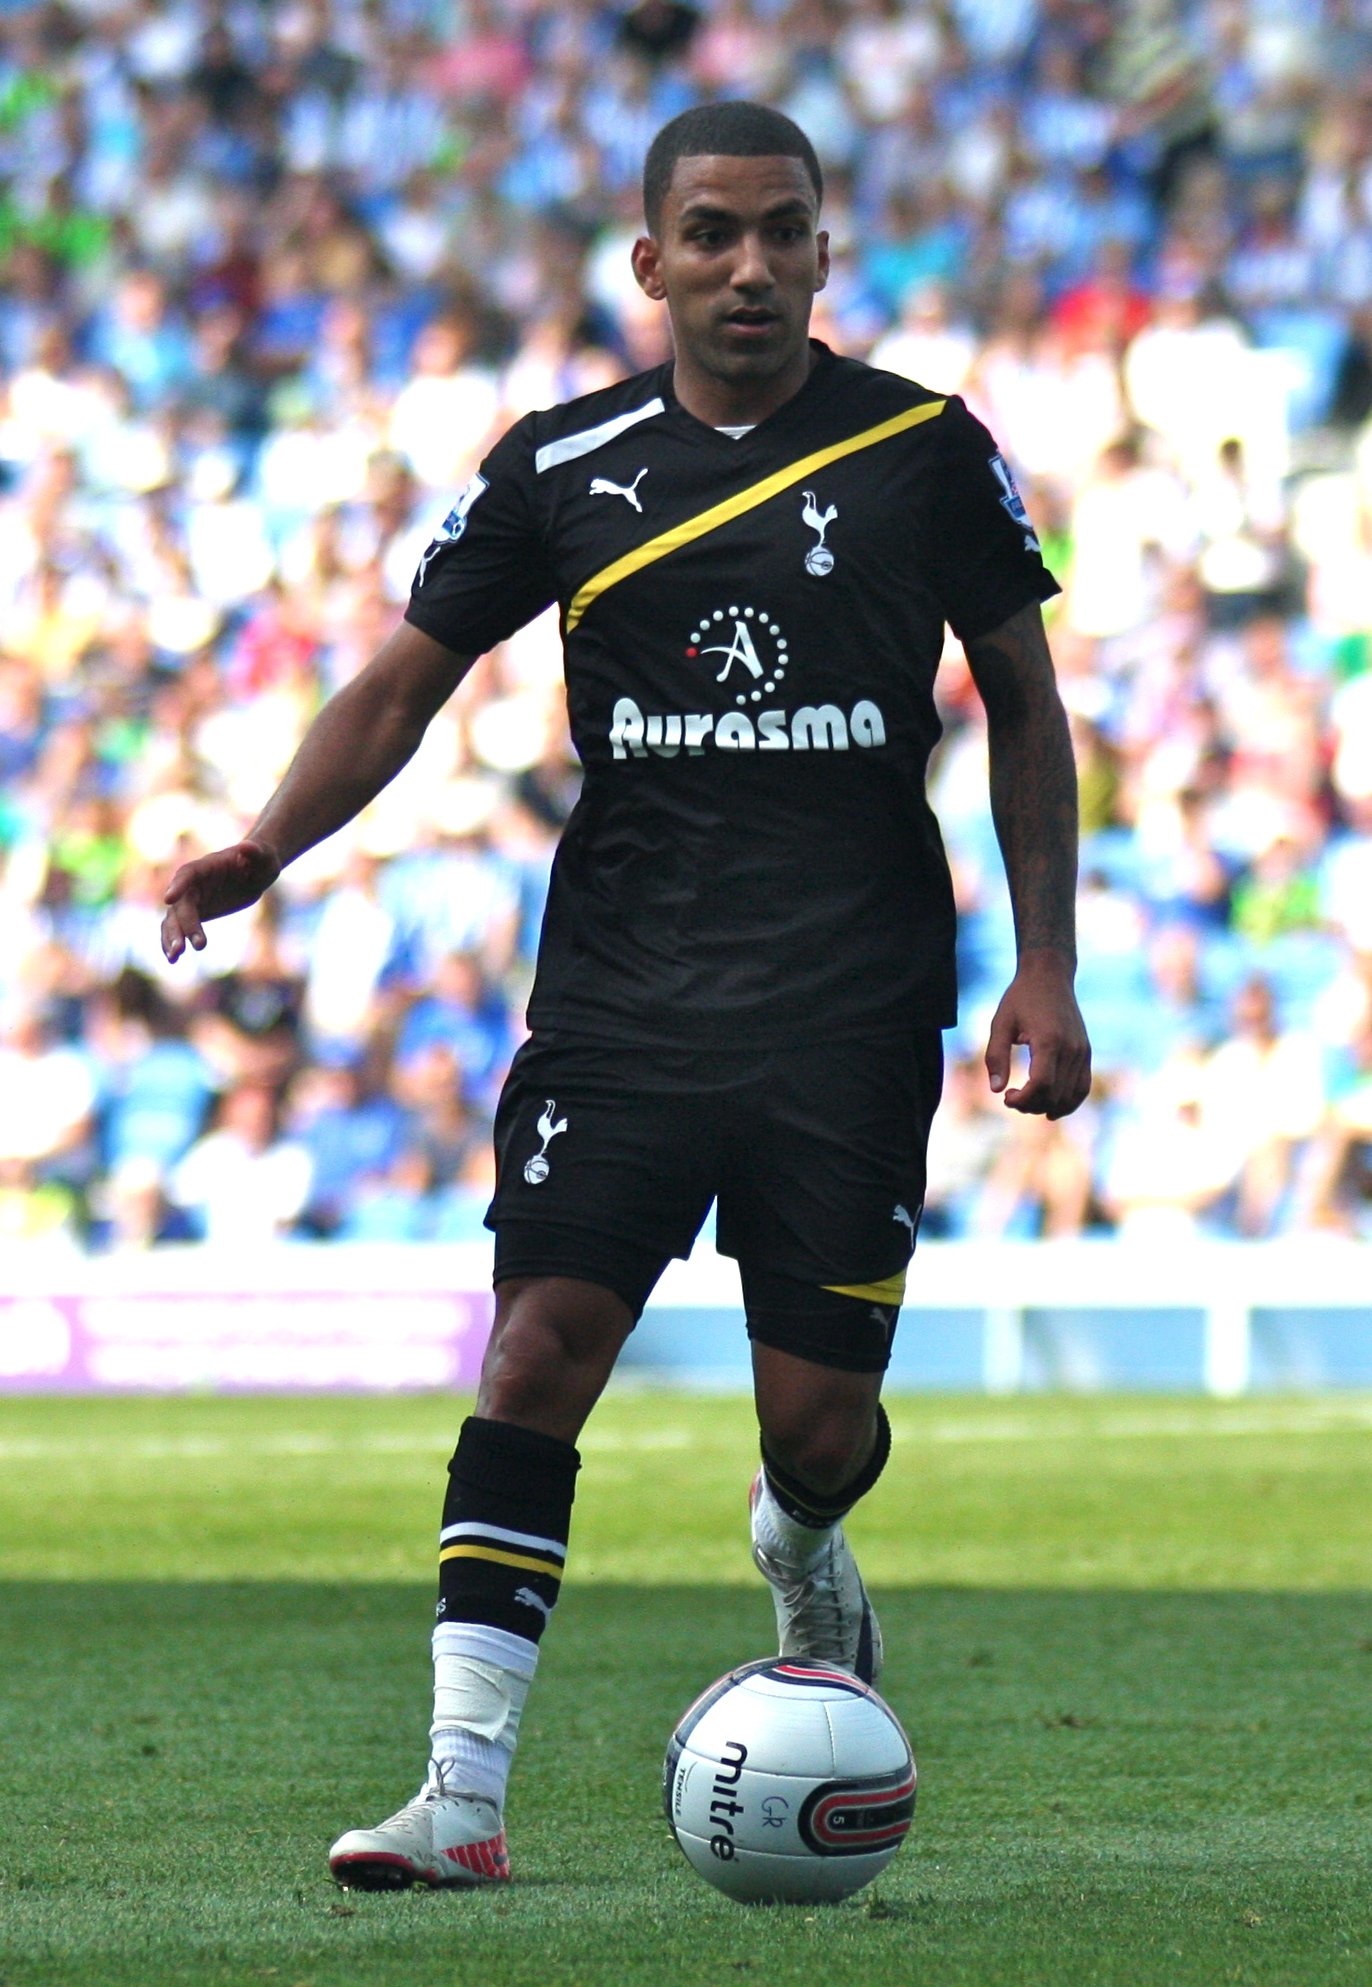 Wishing a very Happy 35th Birthday to our former Midfielder Aaron Lennon  